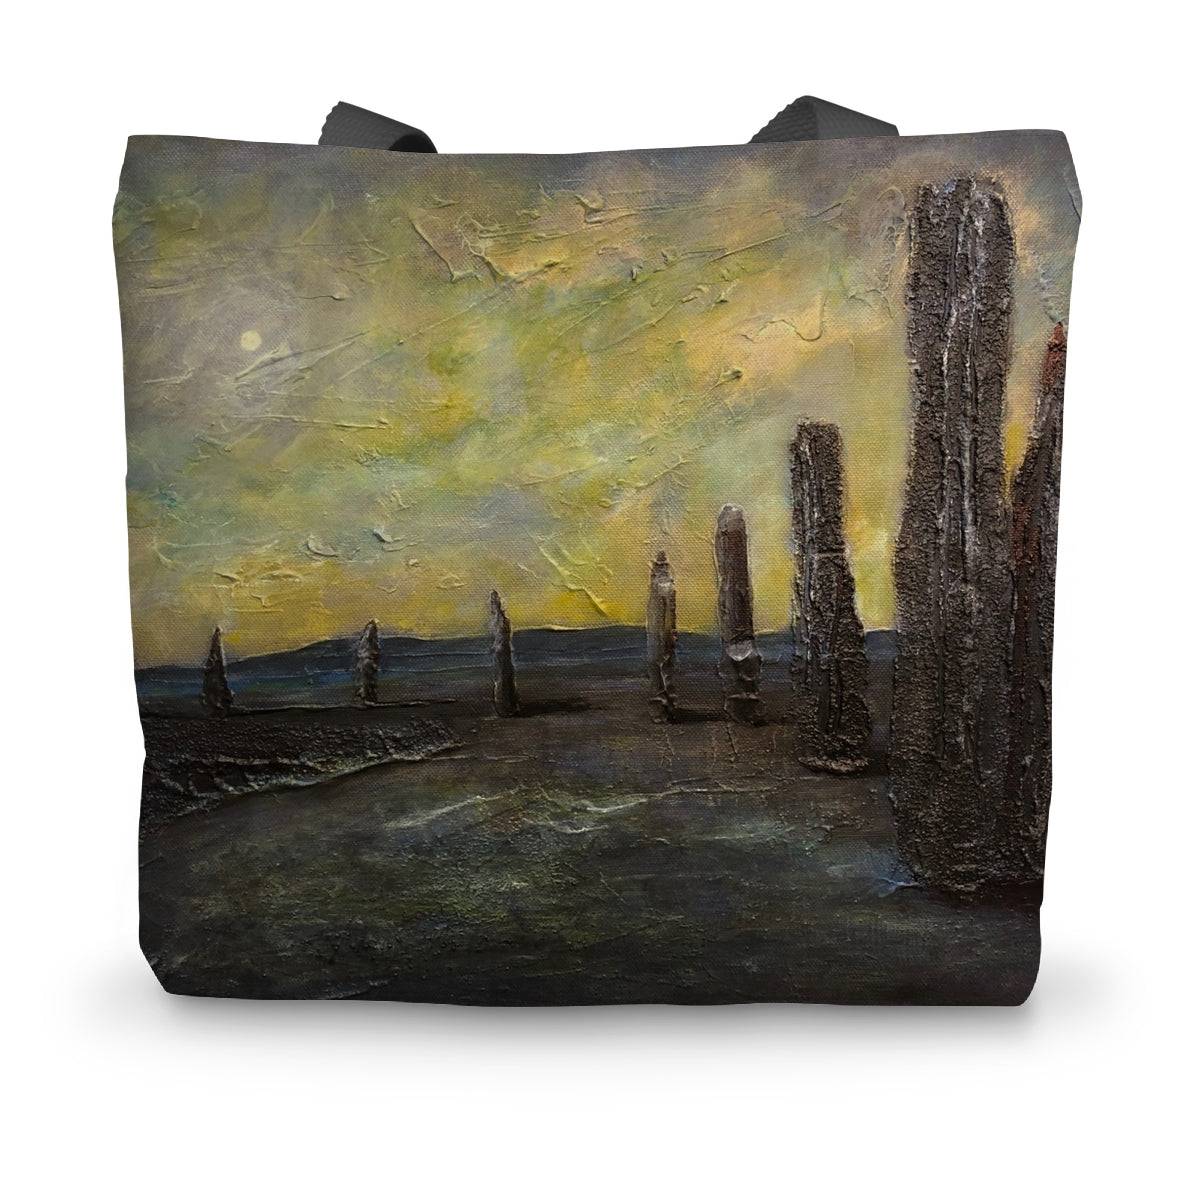 An Ethereal Ring Of Brodgar Art Gifts Canvas Tote Bag-Bags-Orkney Art Gallery-14"x18.5"-Paintings, Prints, Homeware, Art Gifts From Scotland By Scottish Artist Kevin Hunter